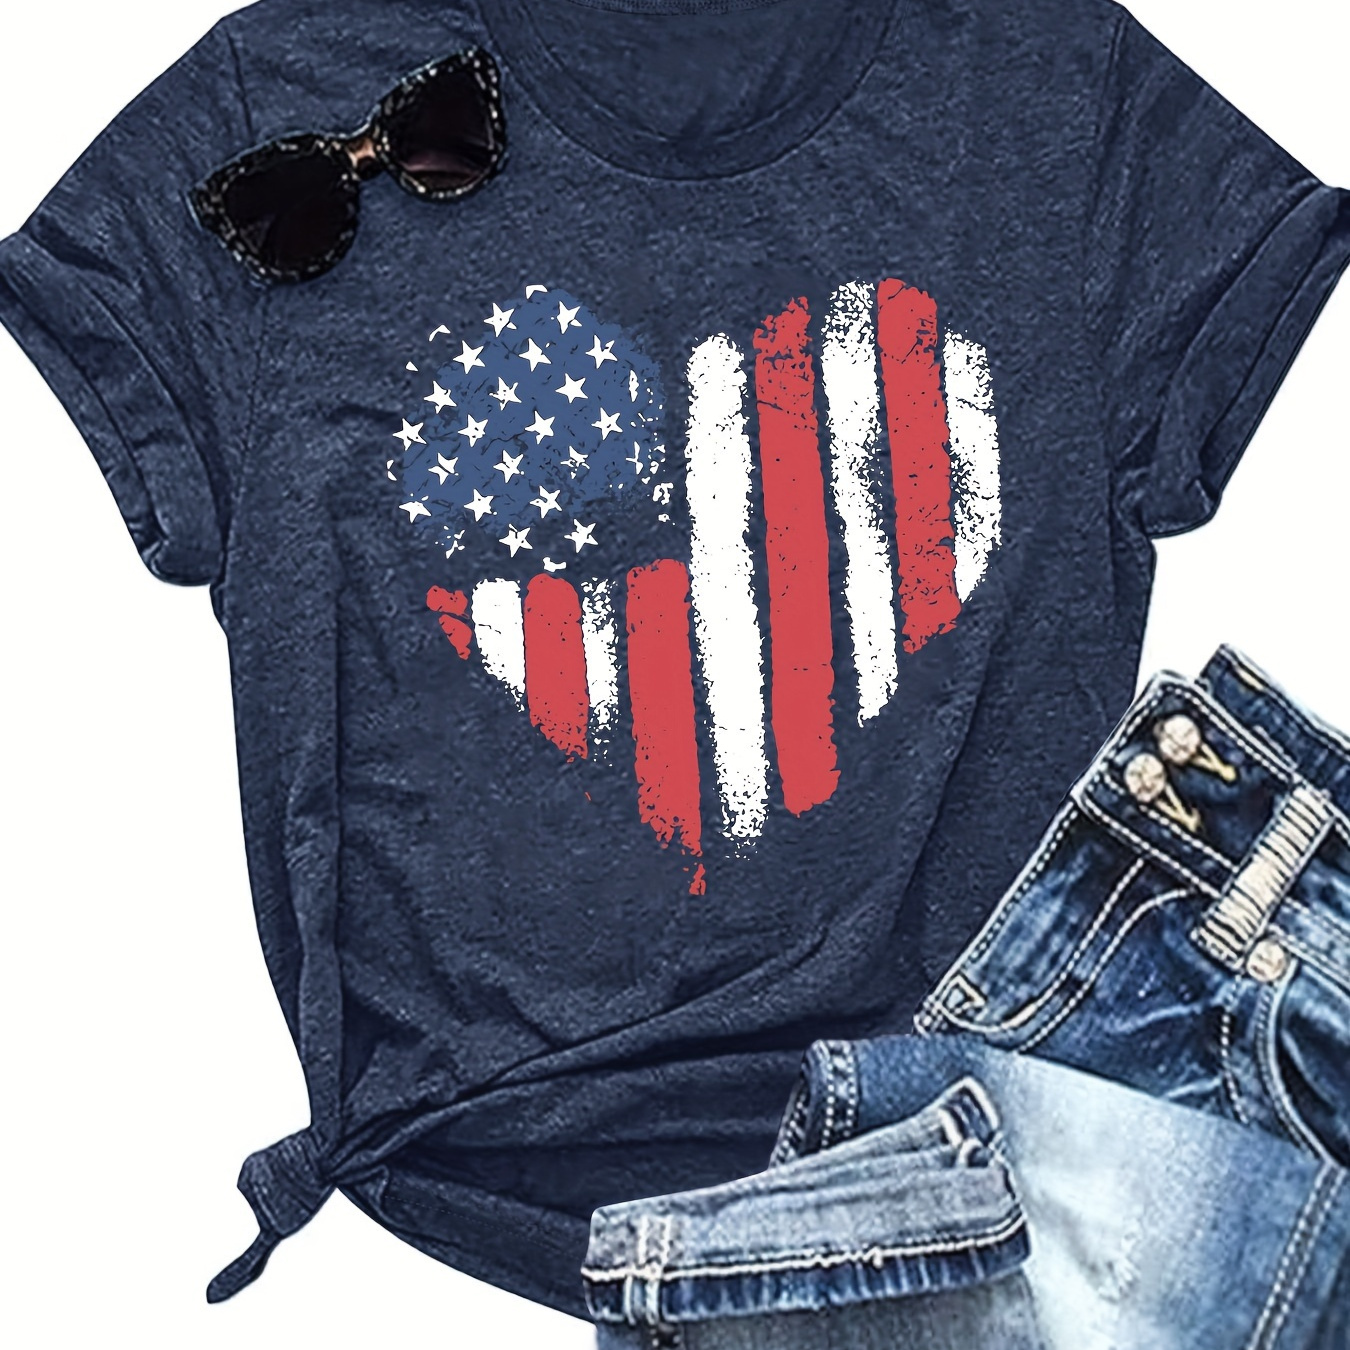 

American Flag Print Crew Neck T-shirt, Short Sleeve Casual Top For Spring & Summer, Women's Clothing